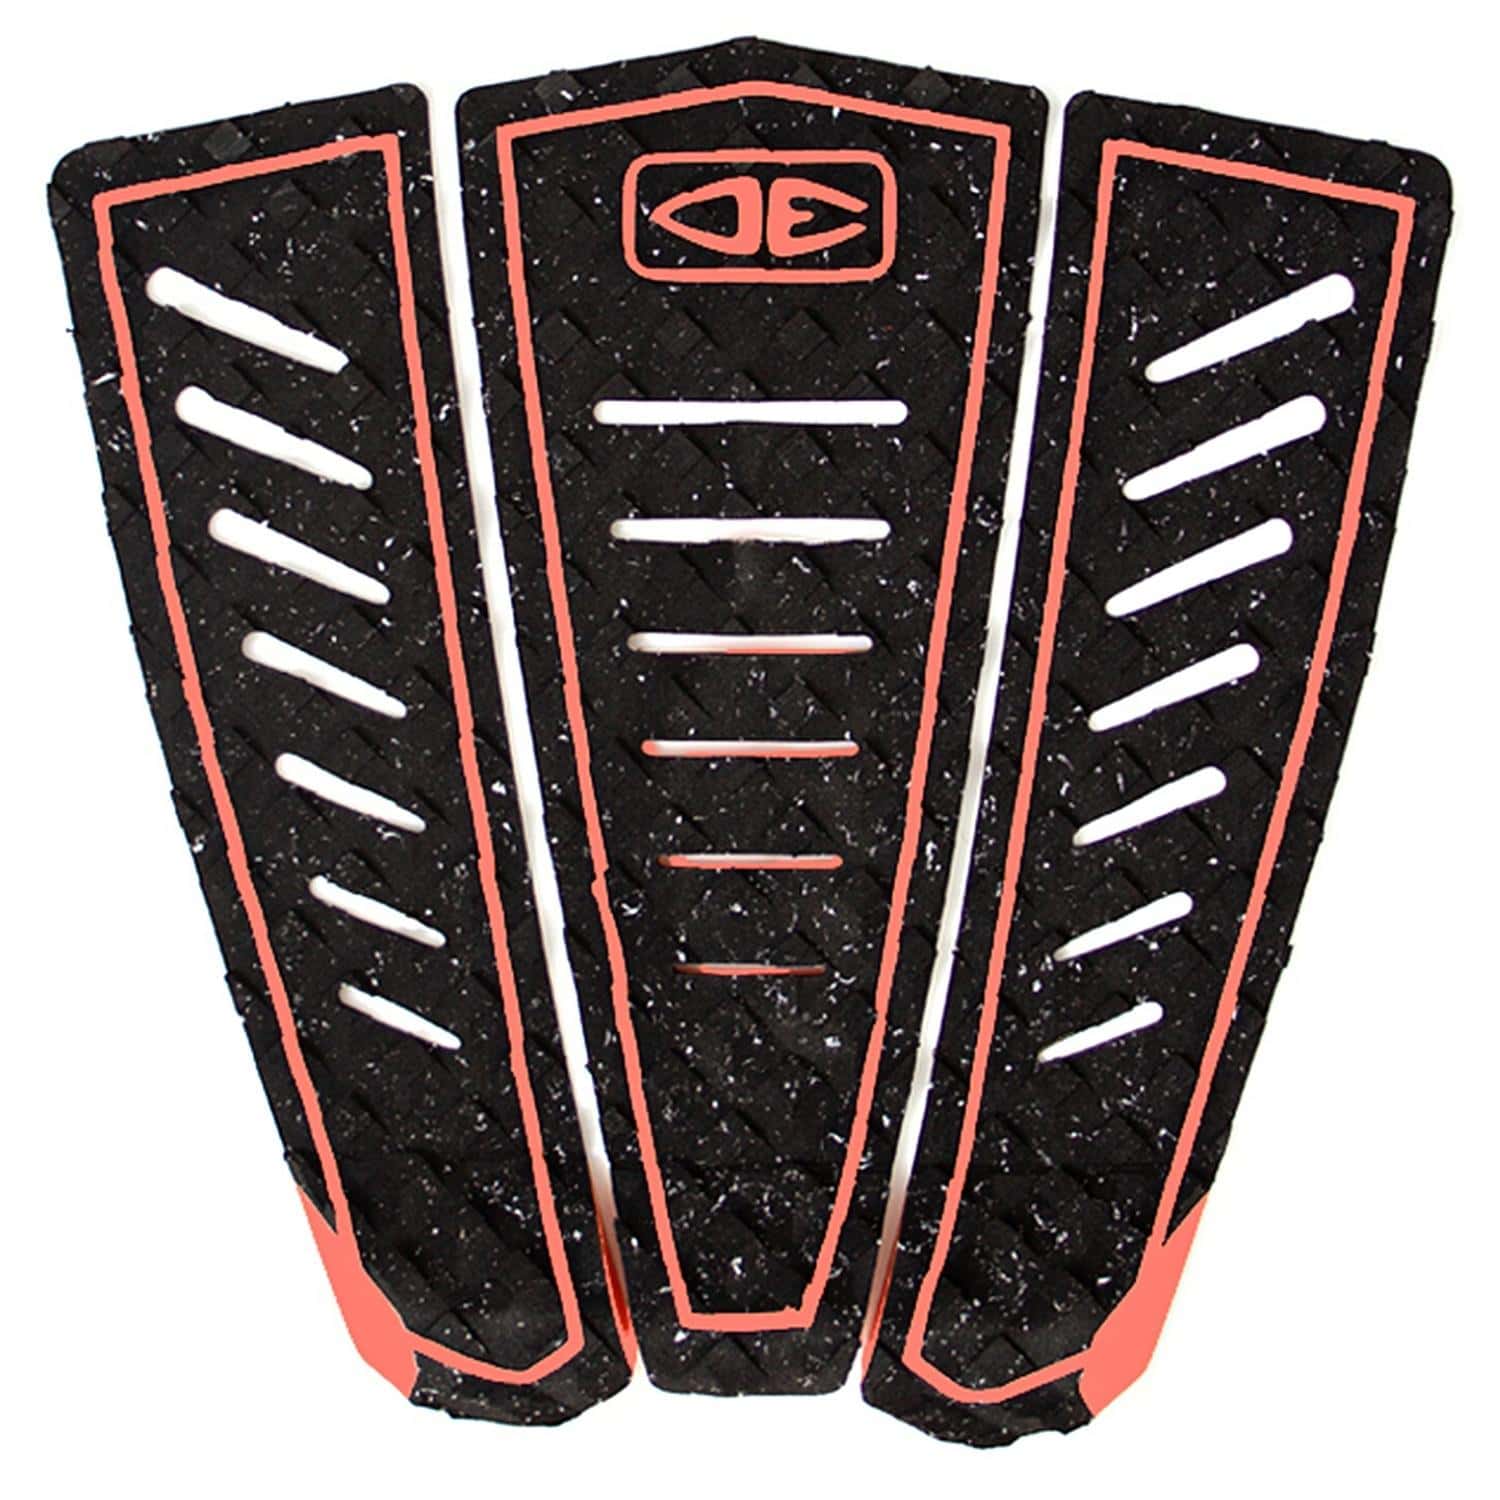 Ocean And Earth Kanoa Igarashi Pro Surfboard Tail Pad - Black/Coral - 3 Piece Tail Pad by Ocean and Earth